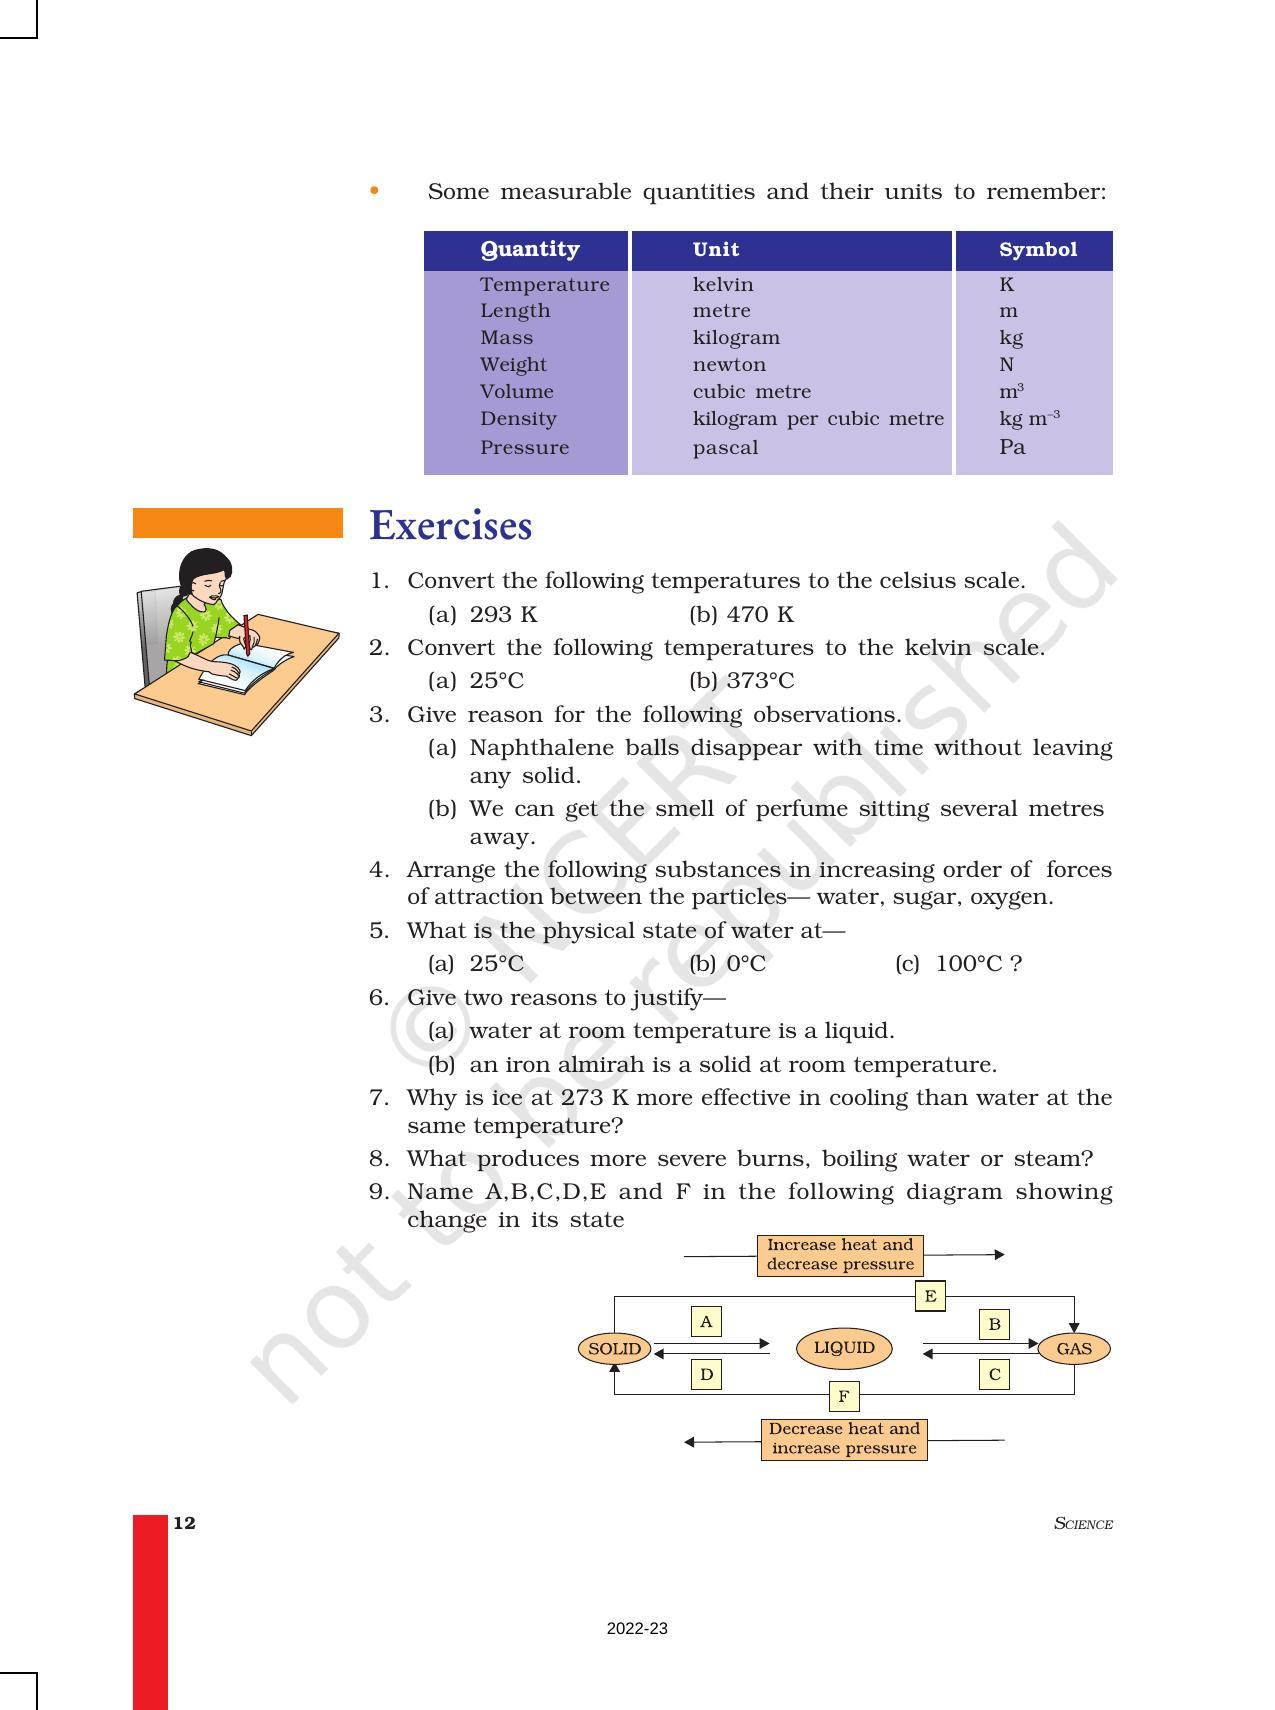 NCERT Book for Class 9 Science Chapter 1 Matter in Our Surroundings - Page 12